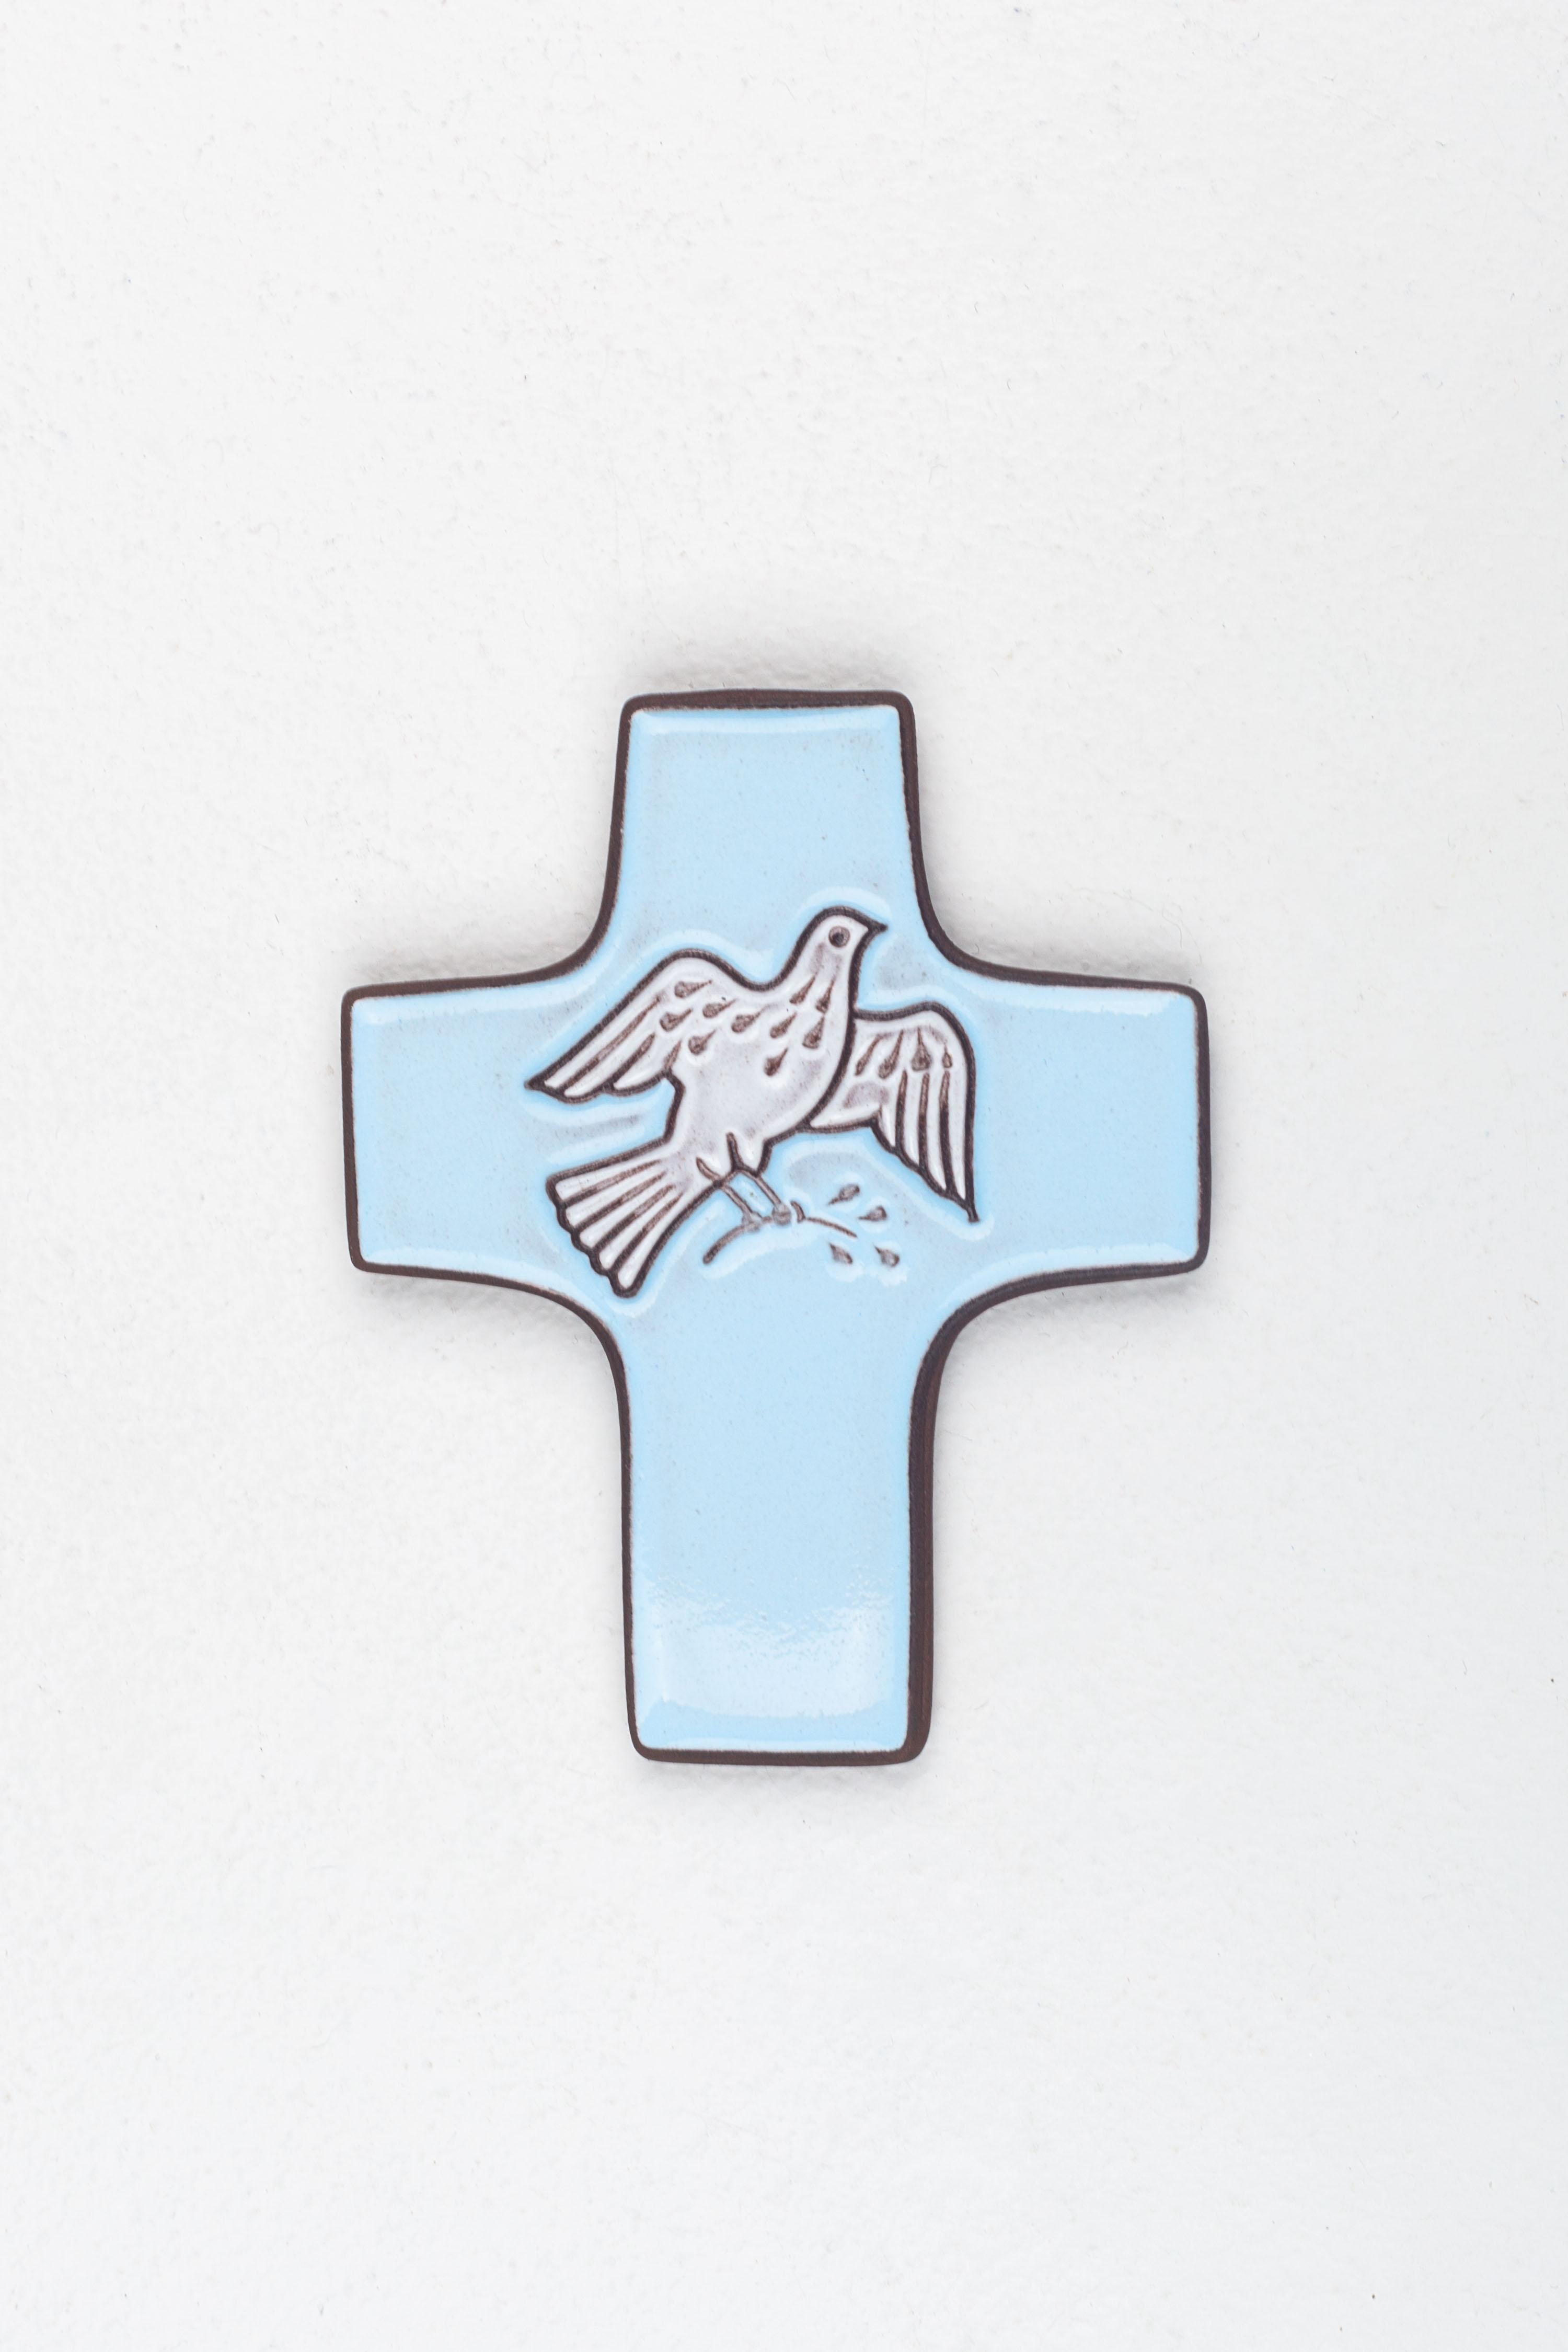 This serene ceramic cross is a distinguished example of mid-century modern studio pottery from Europe. Embodying the innovative spirit of that era, it features the peaceful figure of a dove in relief, a symbol traditionally associated with the Holy